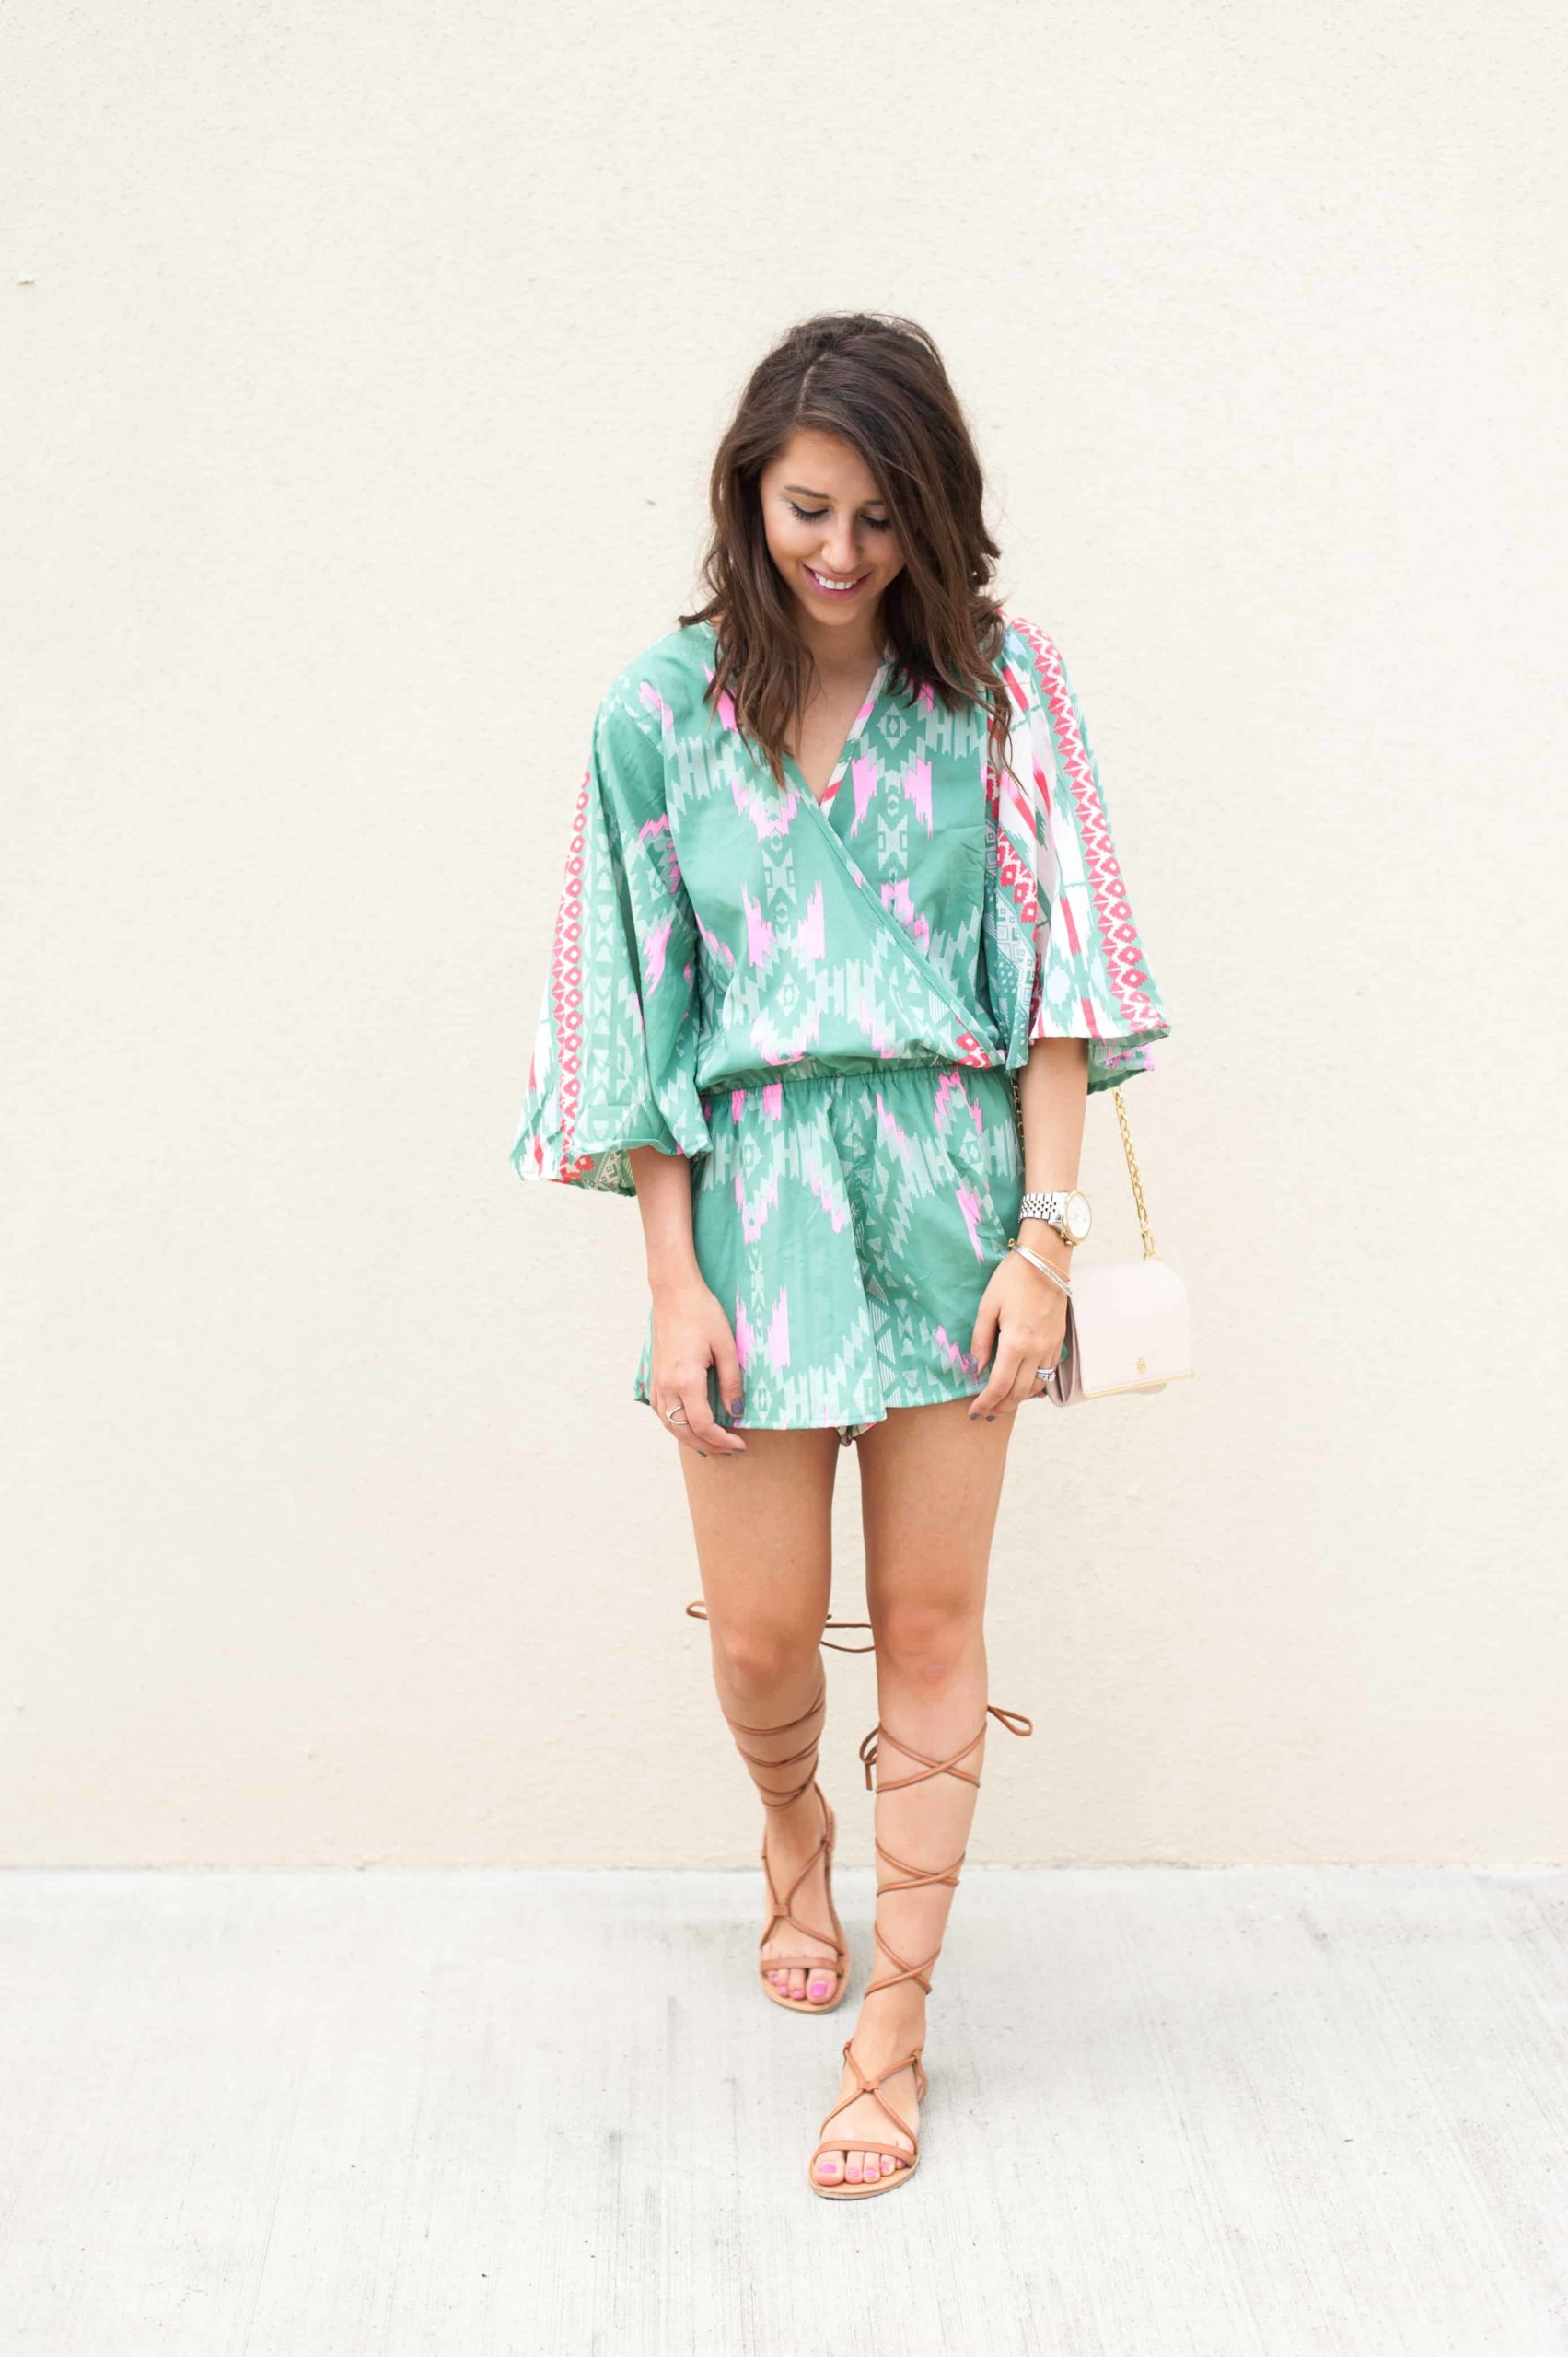 Dress Up Buttercup // A Houston-based fashion and inspiration blog developed to daily inspire your own personal style by Dede Raad | Santa Fe Romper